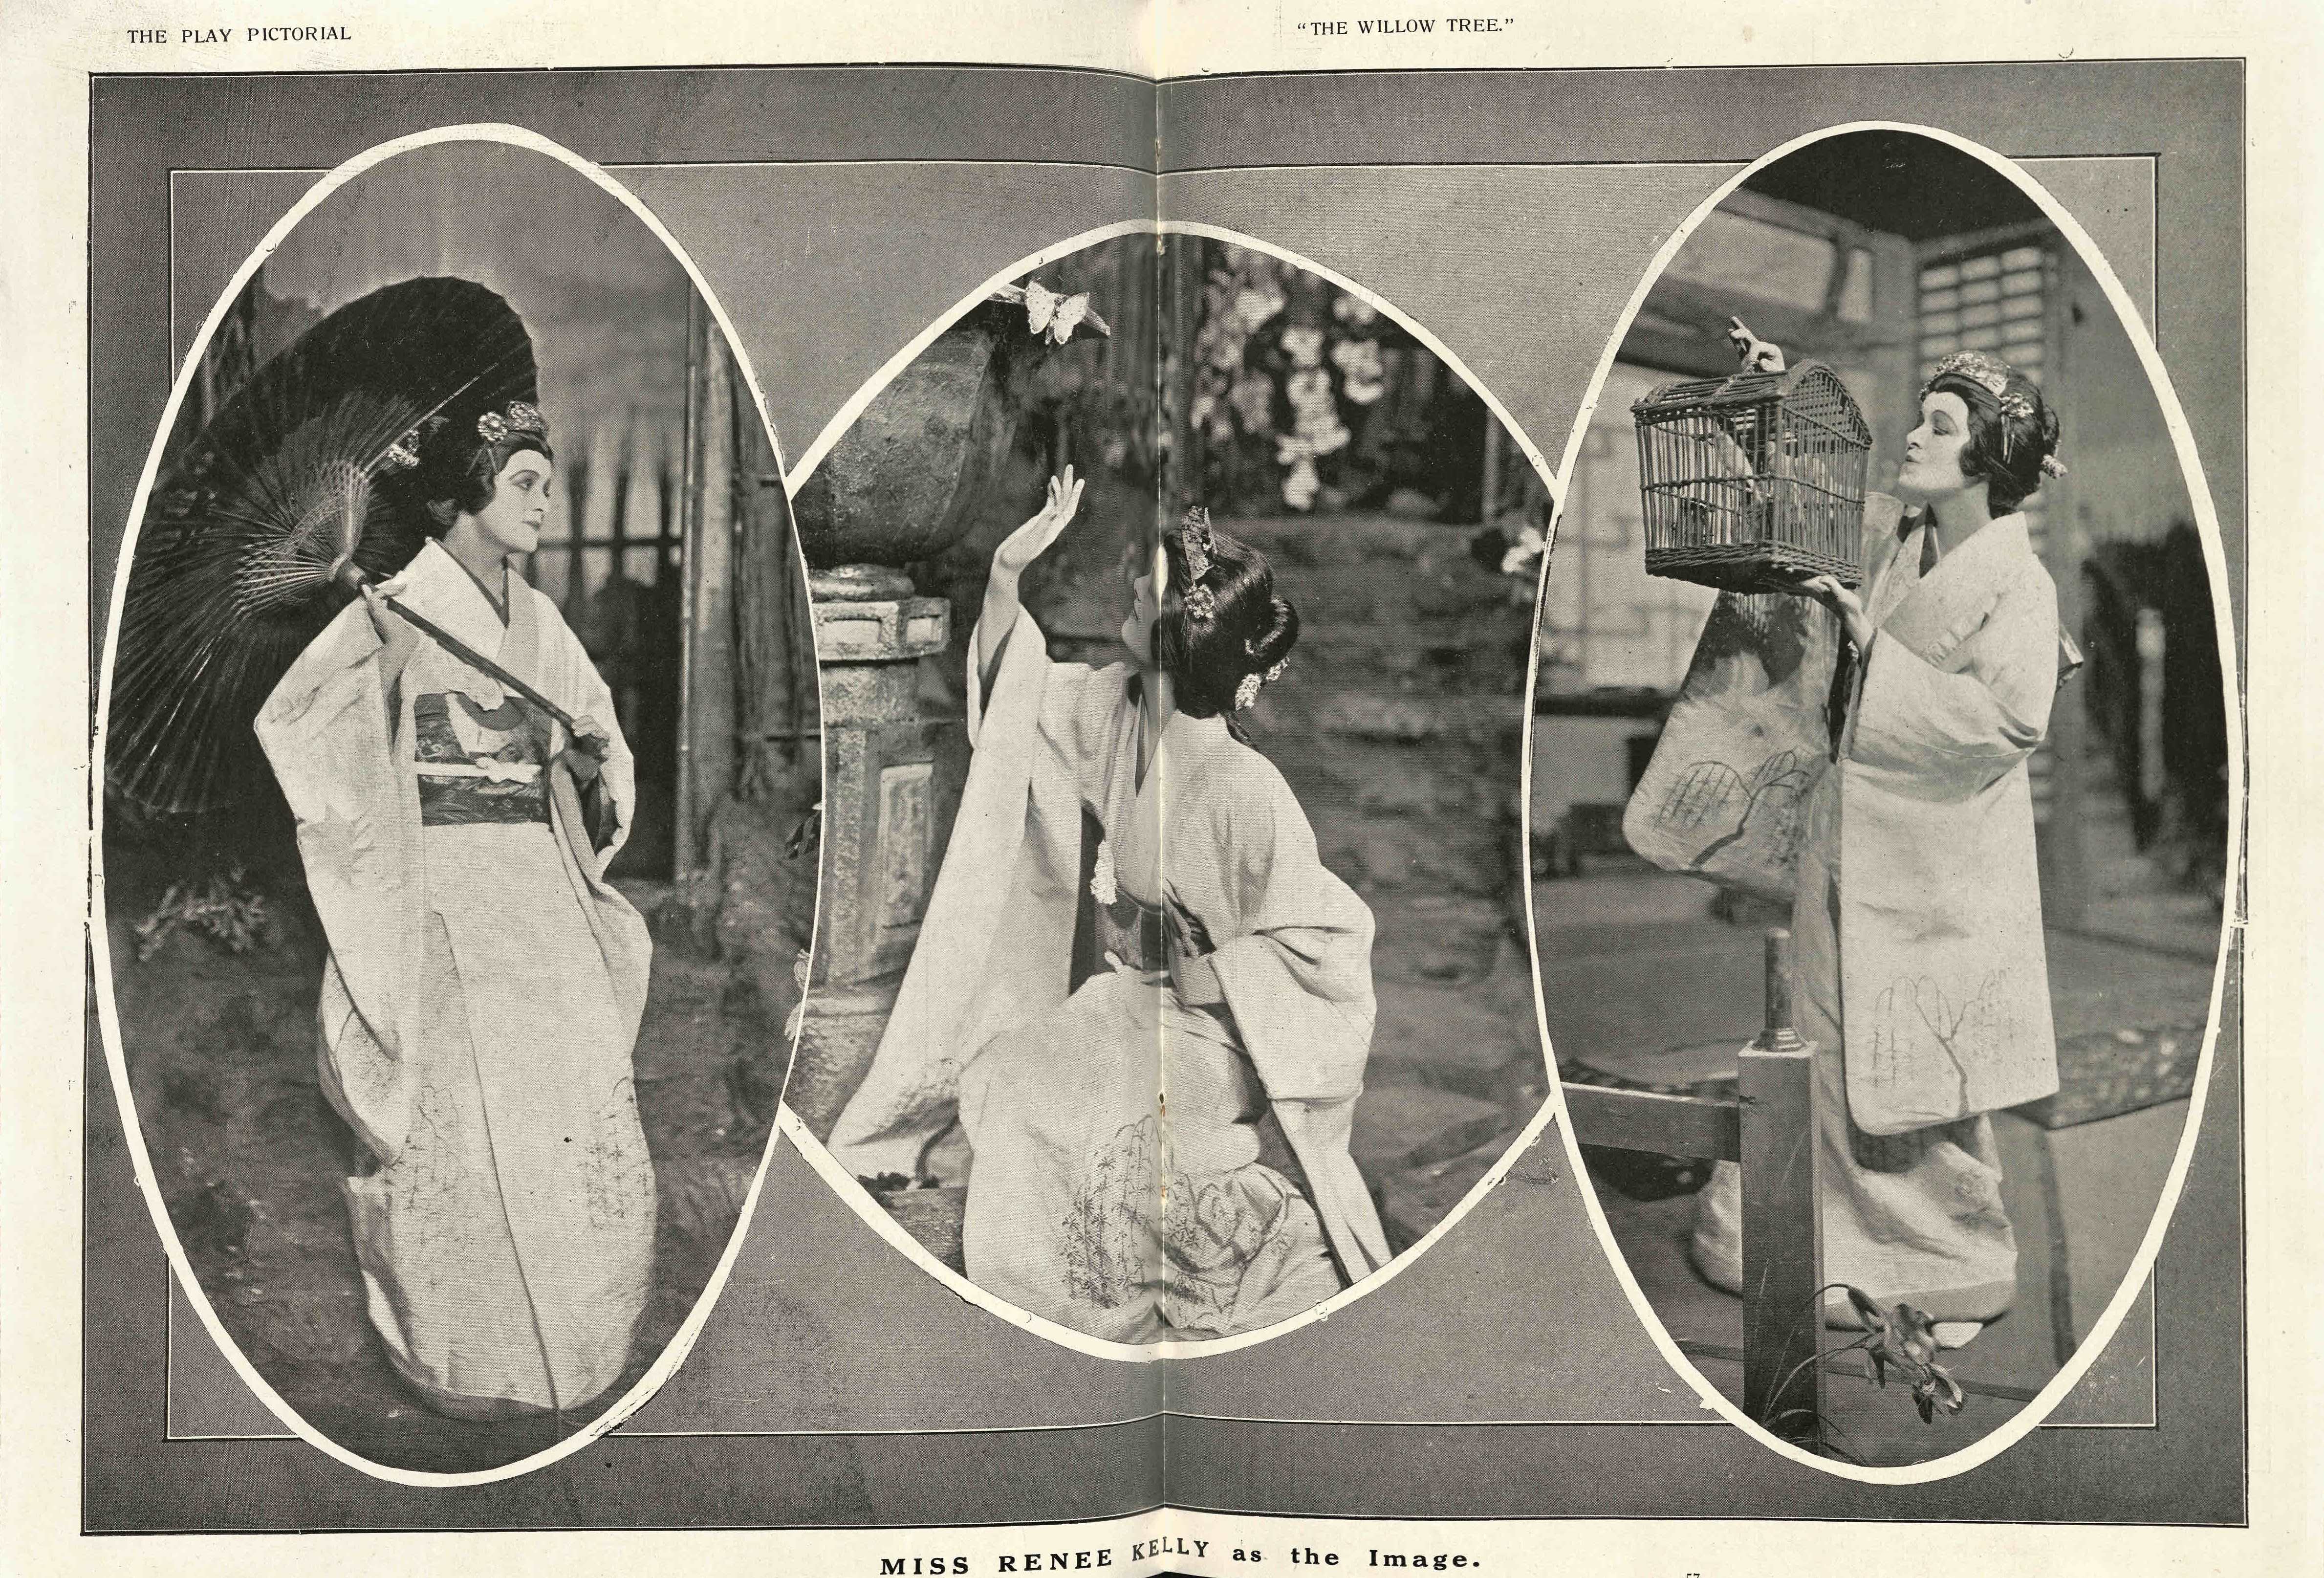 Extract from the Play Pictorial for The Willow Tree